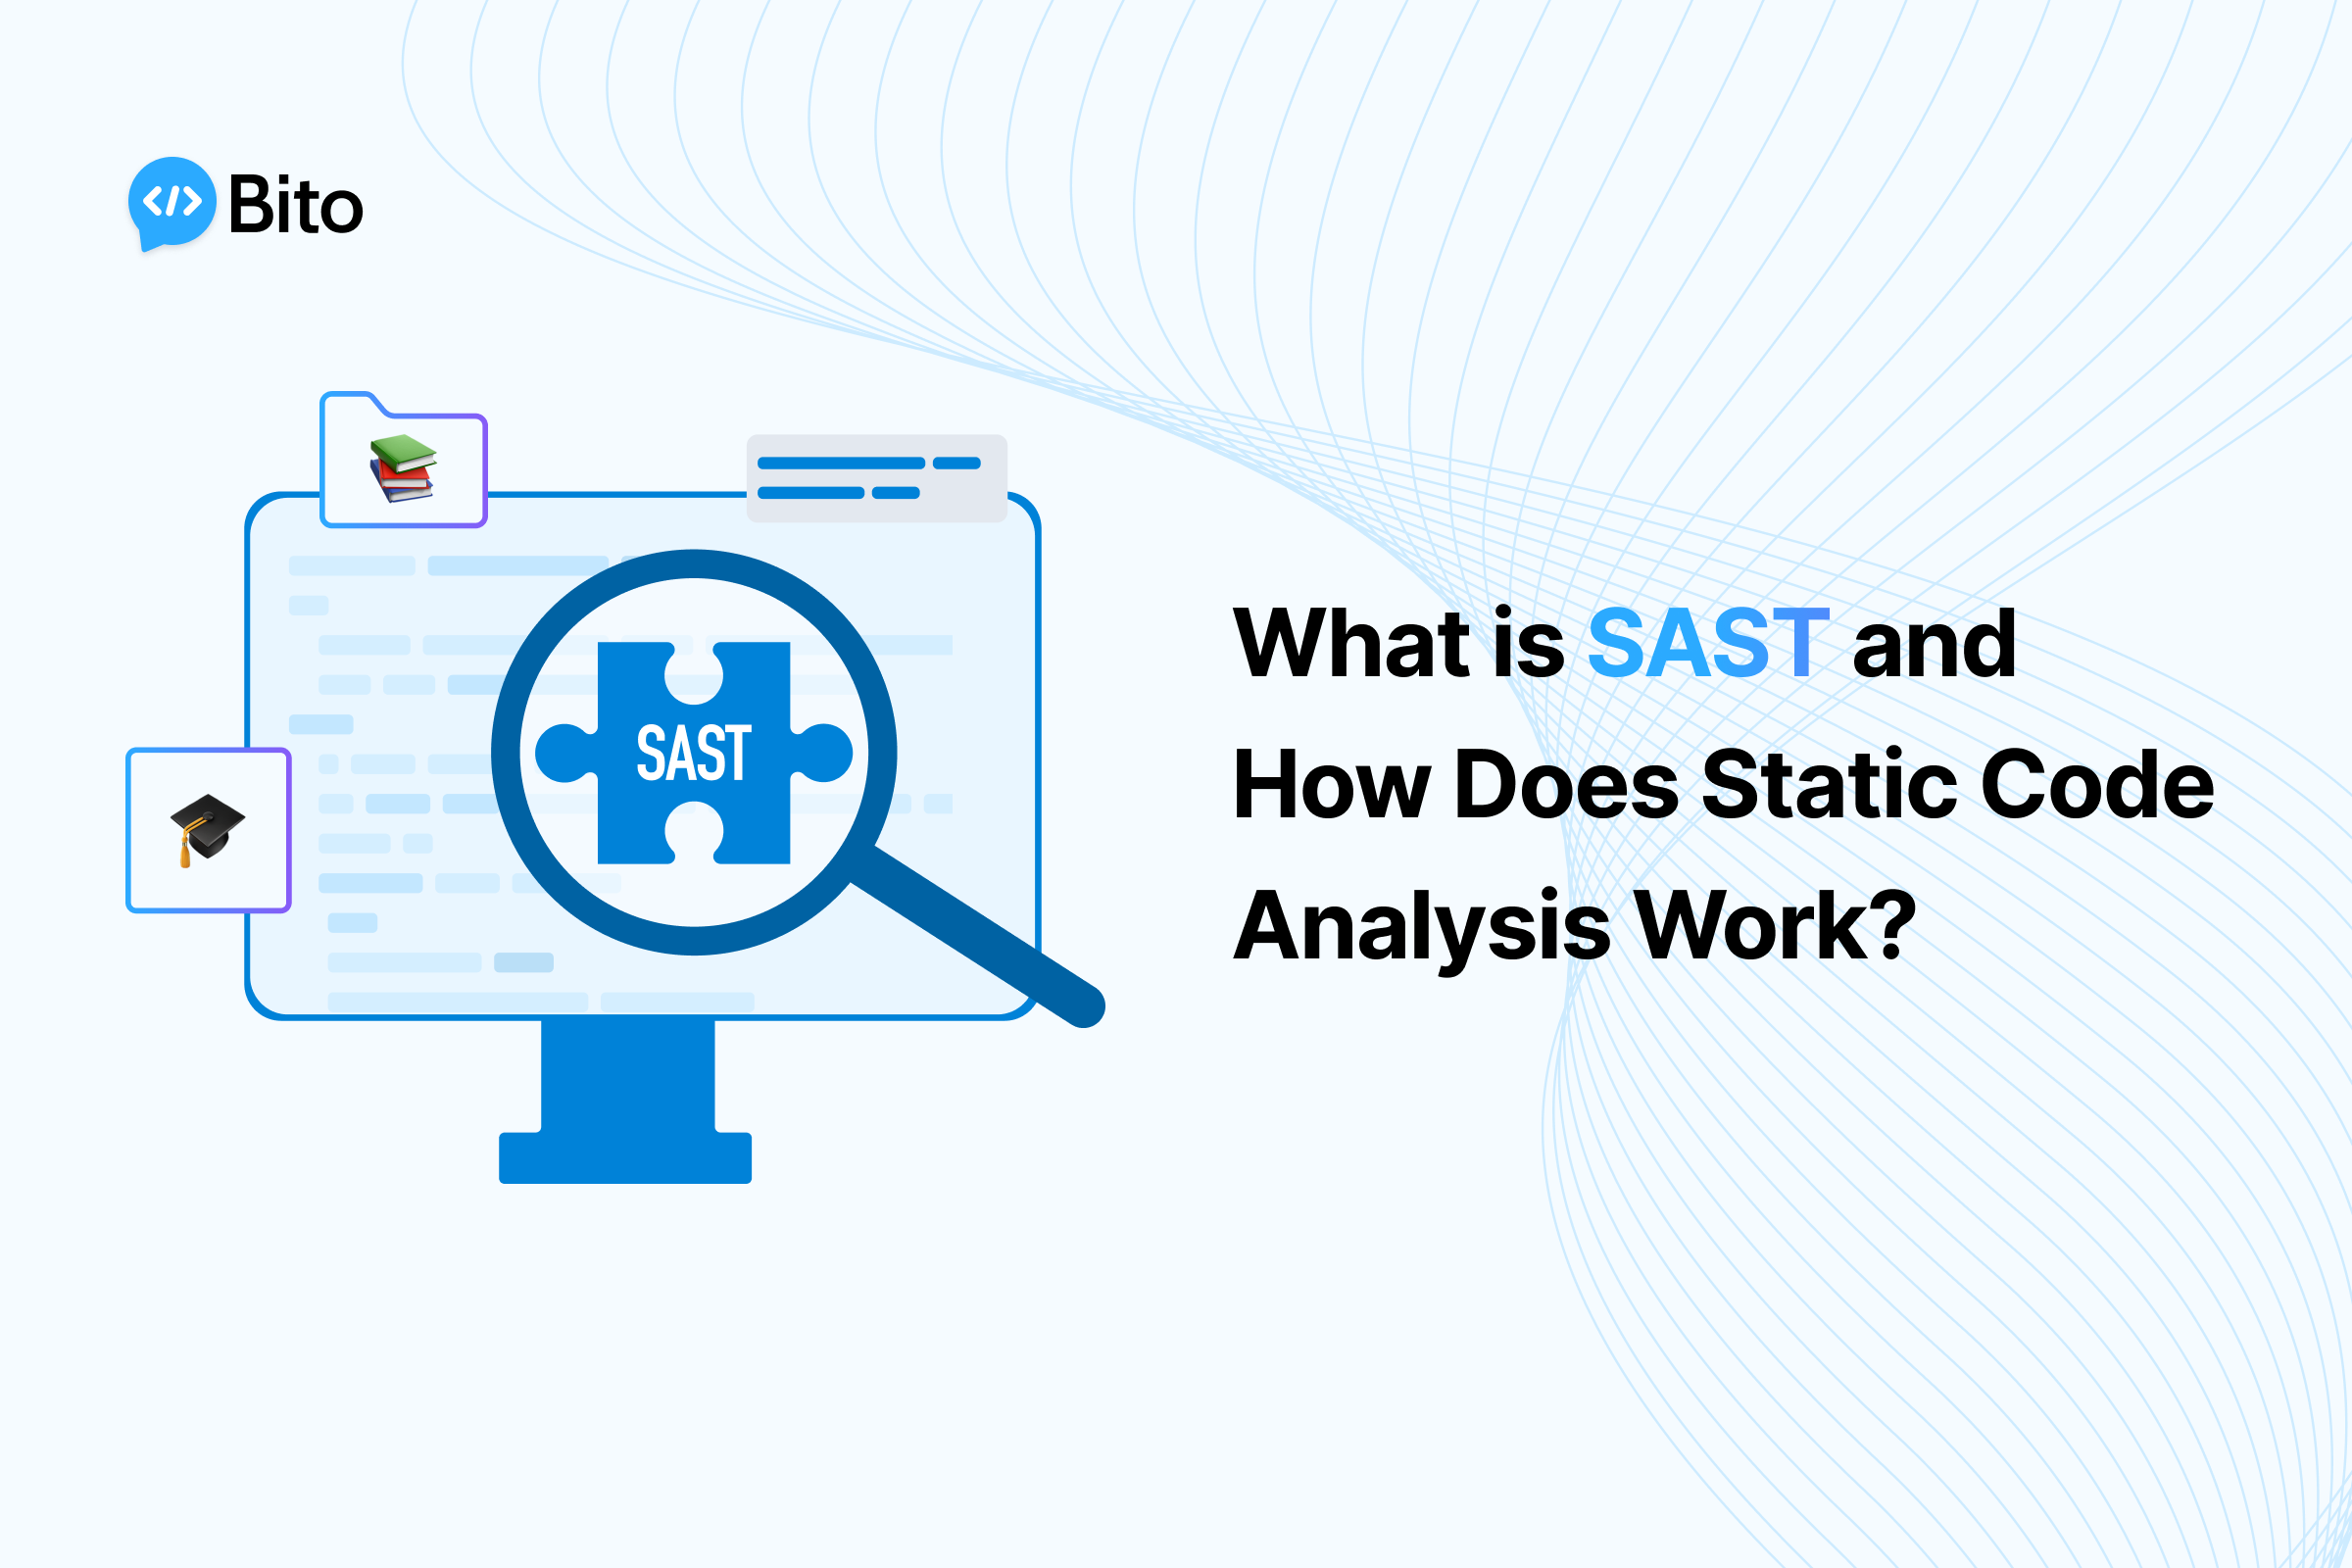 What is SAST and How Does Static Code Analysis Work?